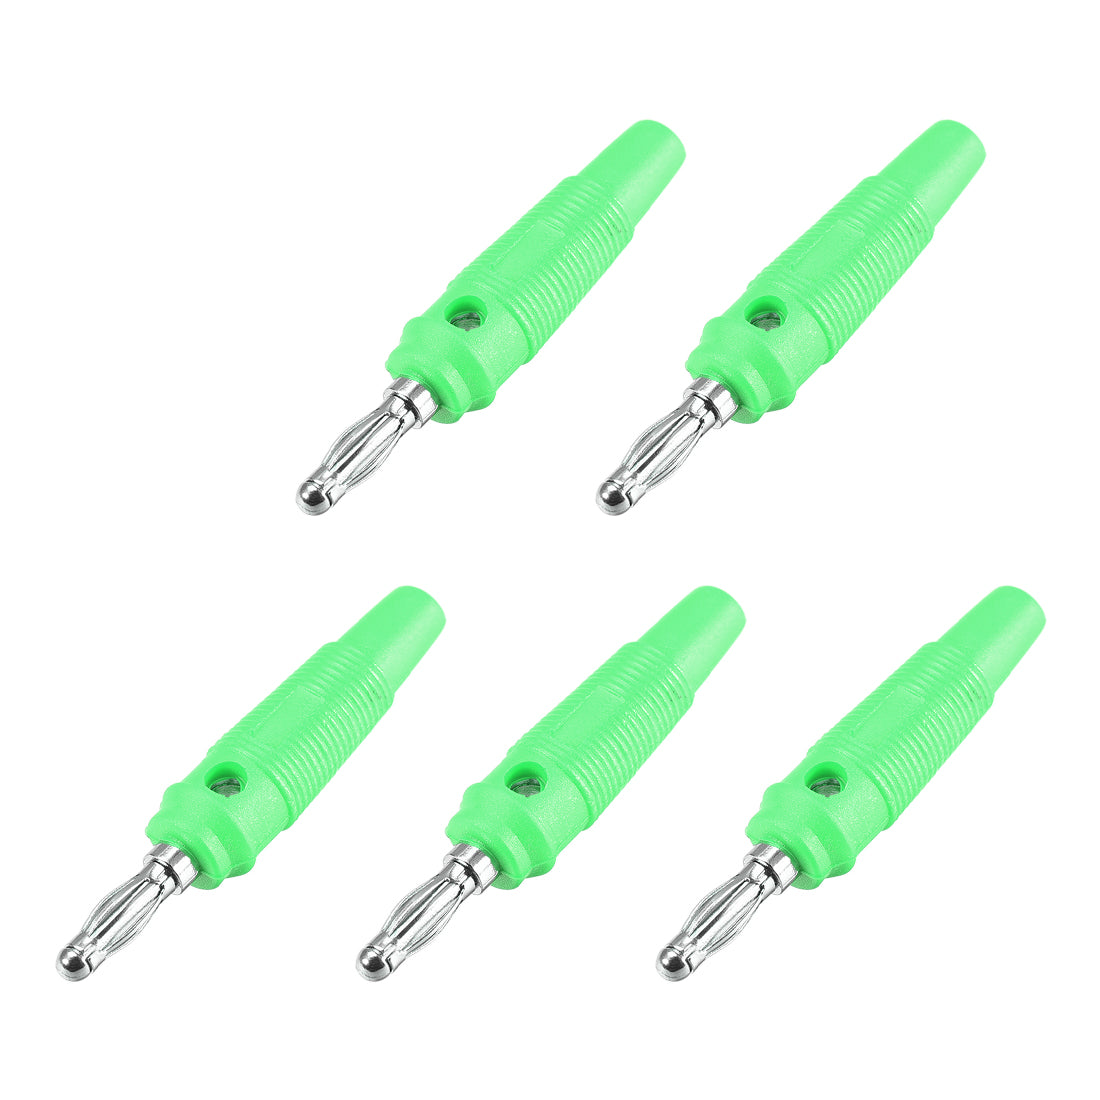 uxcell Uxcell 4mm Banana Speaker Plug Screws Cable Plugs Connectors Green 10A Jack Connector 5pcs